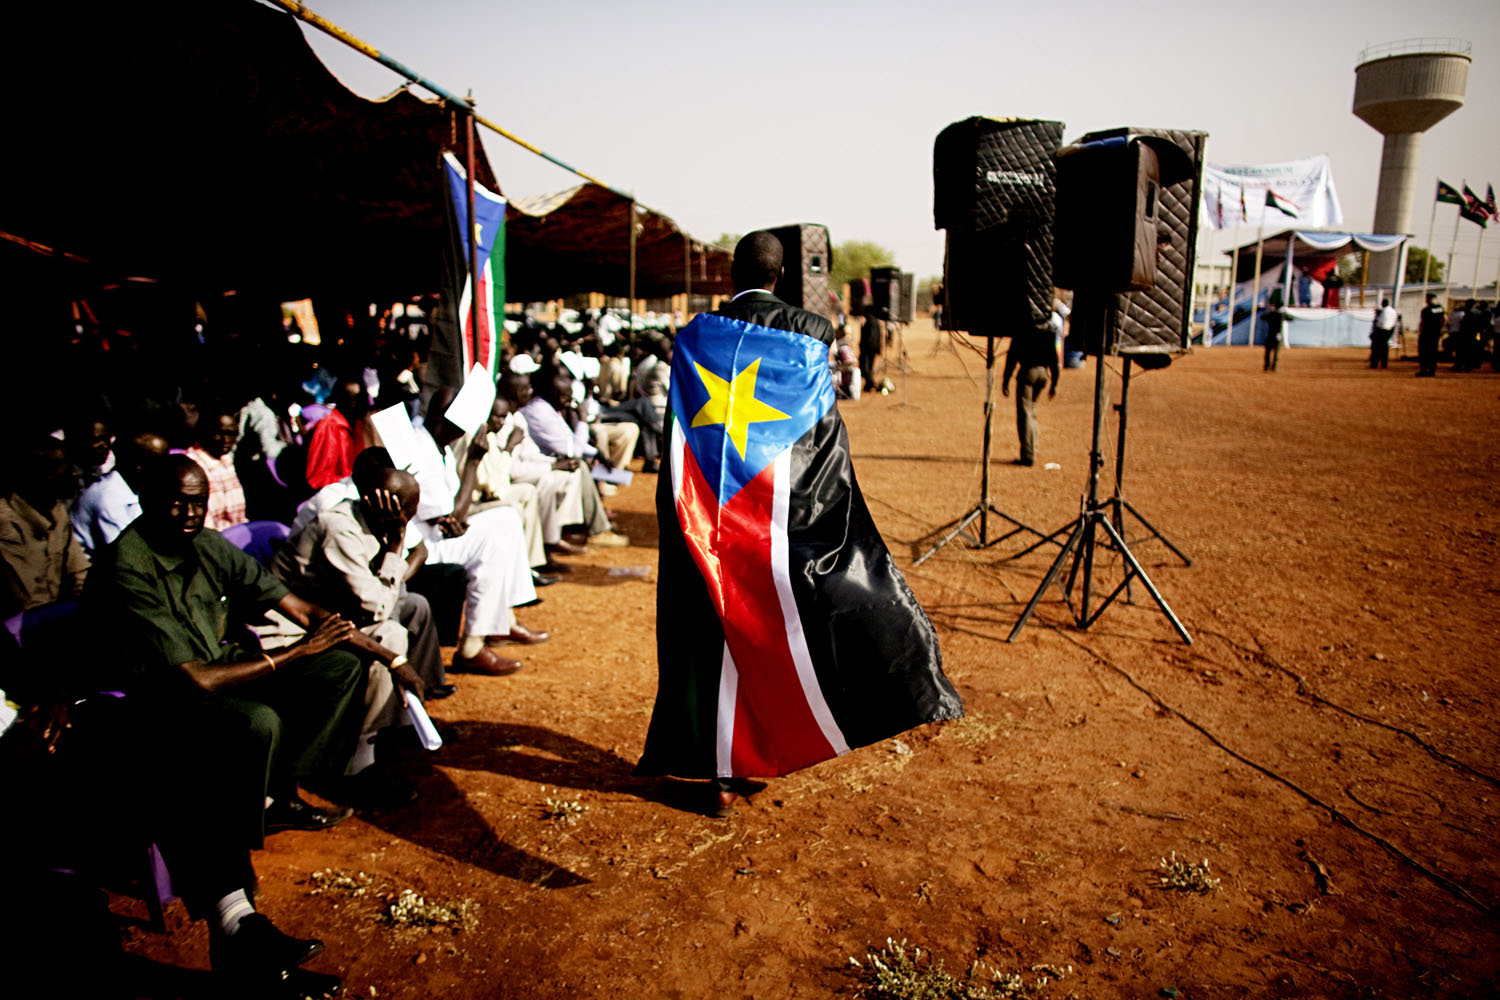 A man dons the flag of the Sudan People's Liberation Movement during a rally in Juba.